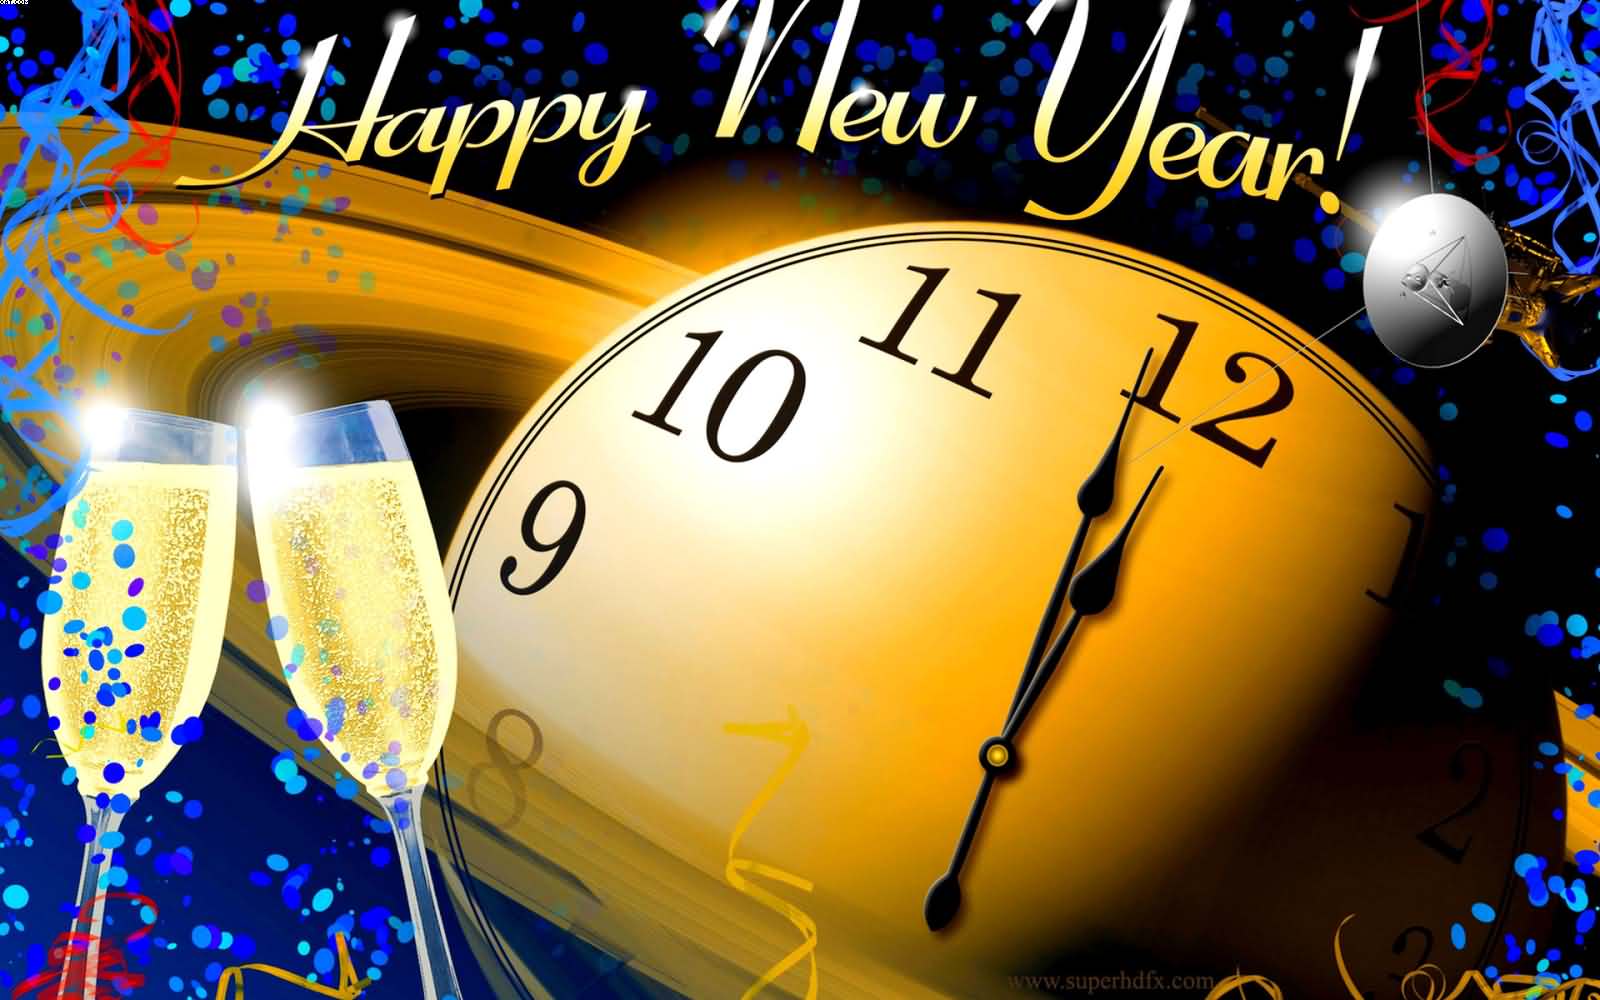 Happy new year clock picture